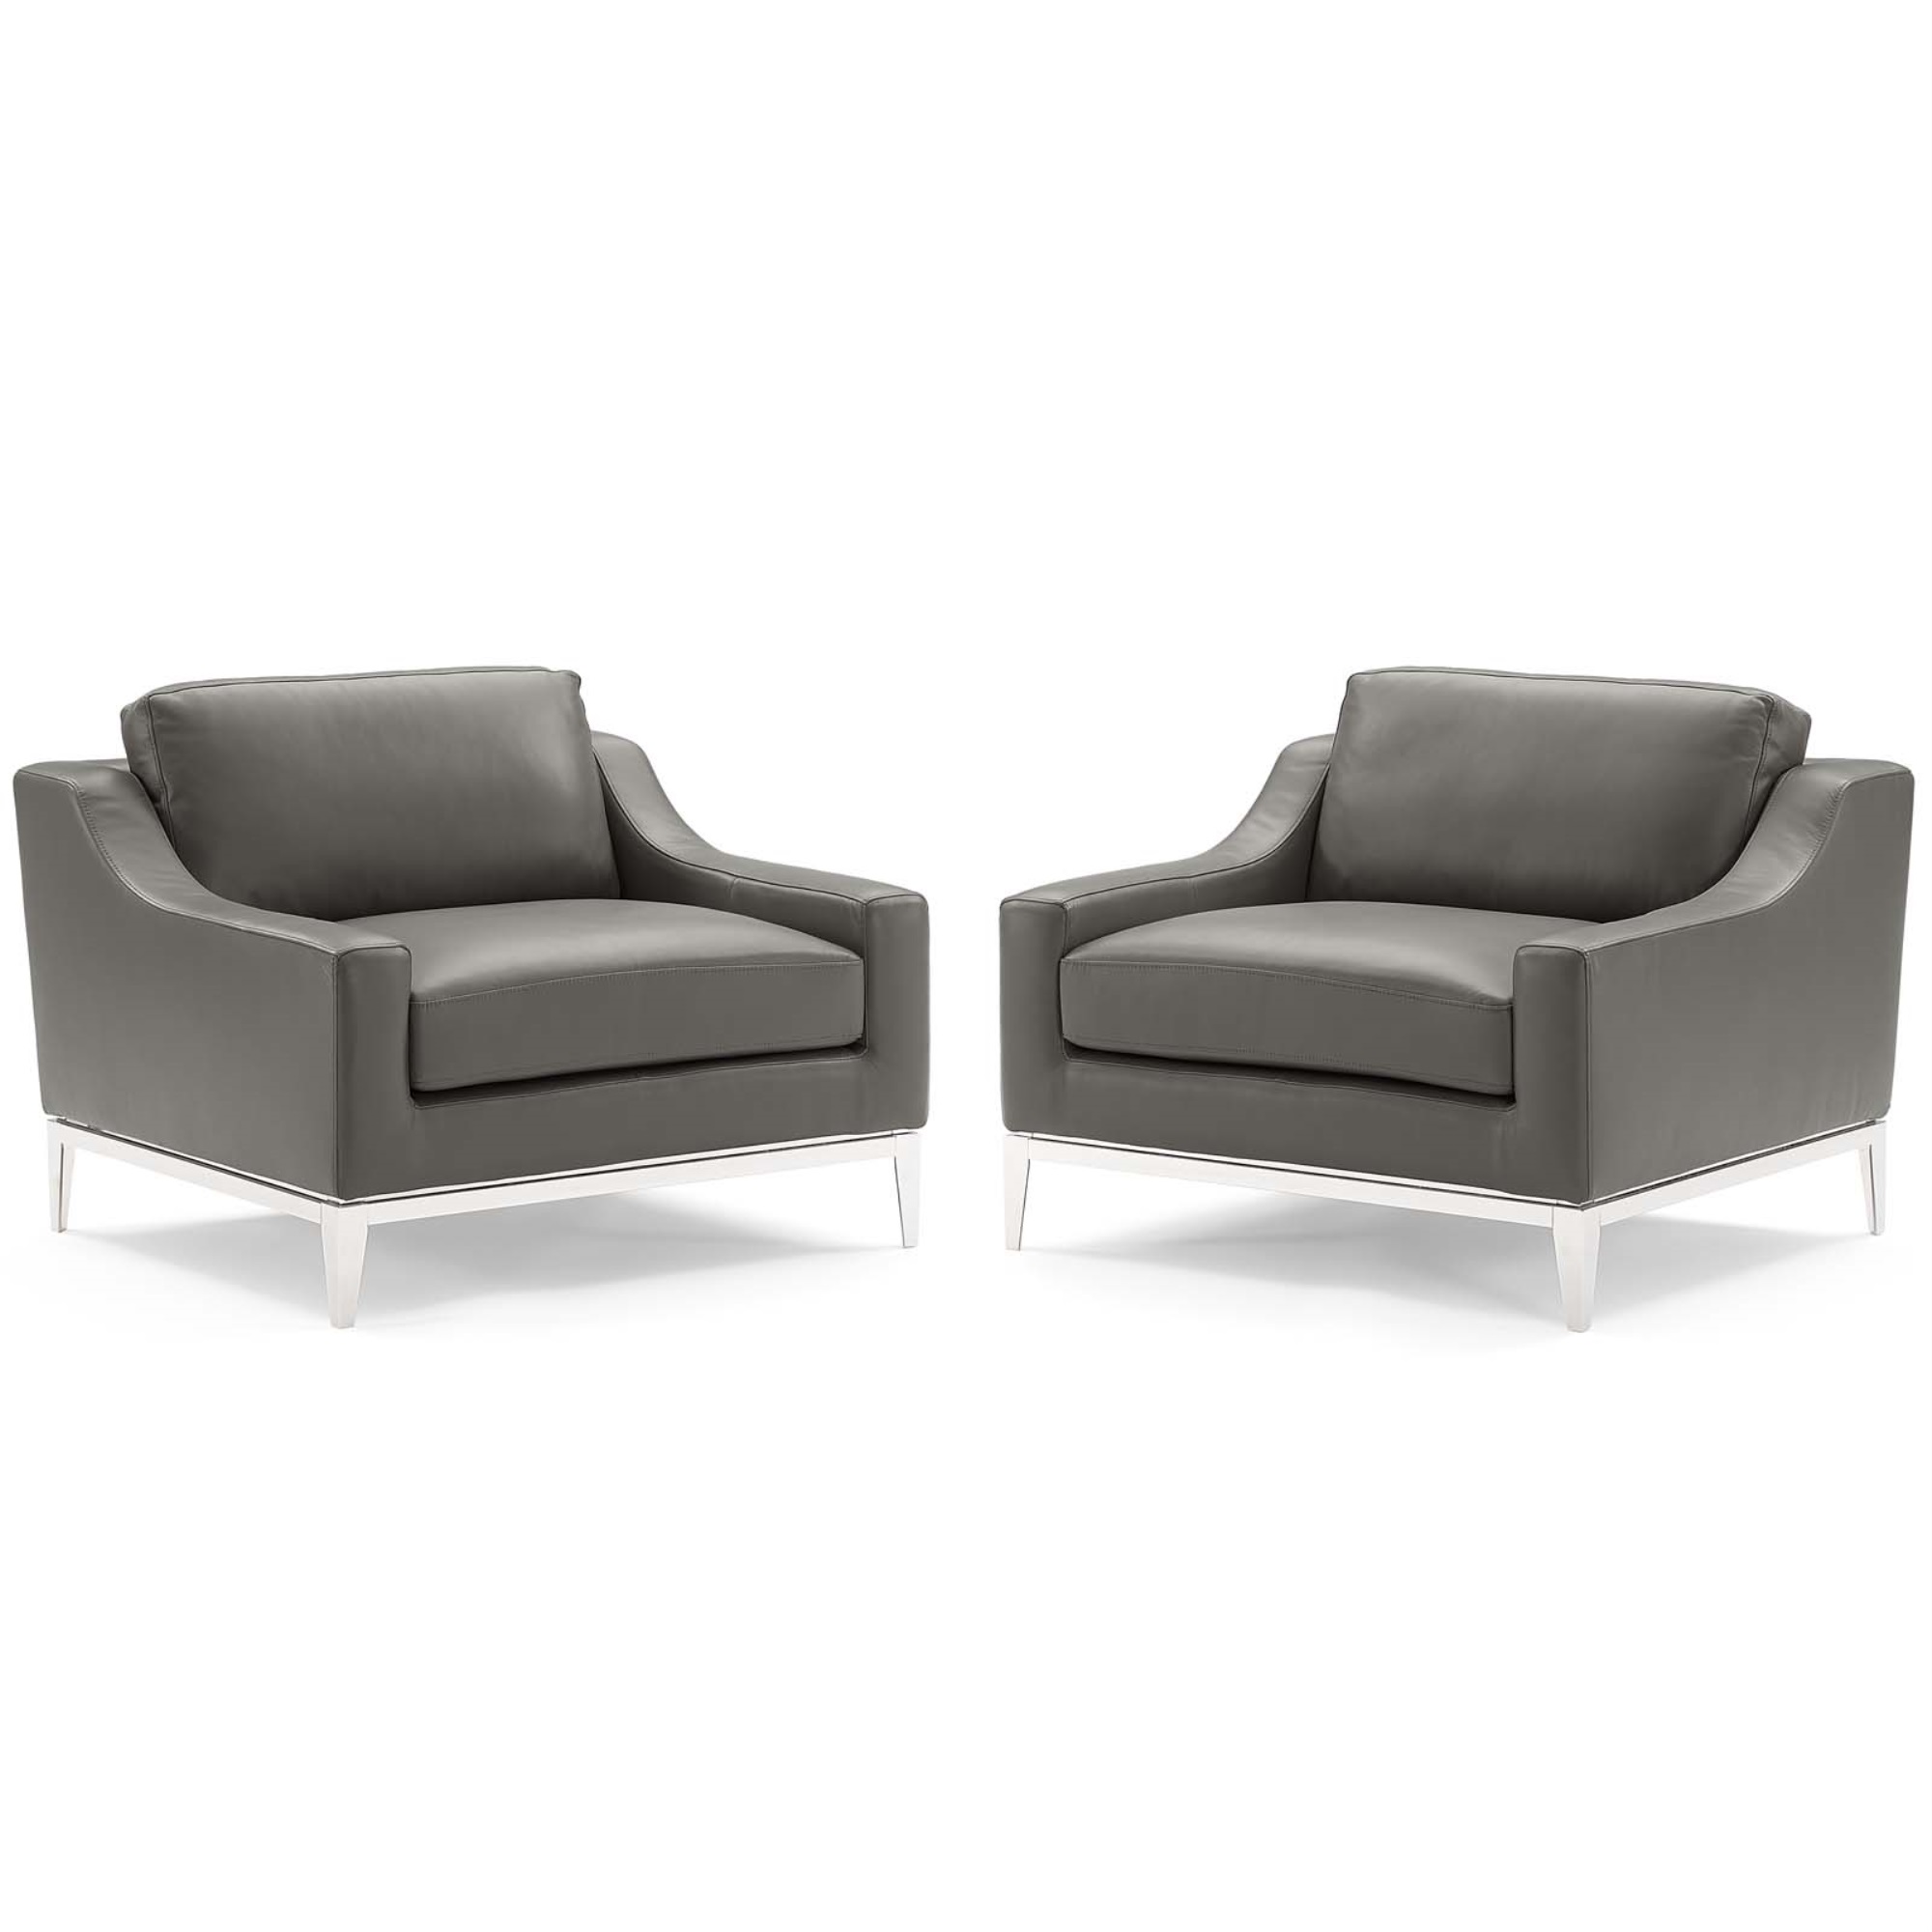 Modway Harness Stainless Steel Base Leather Armchair Set of 2 Gray